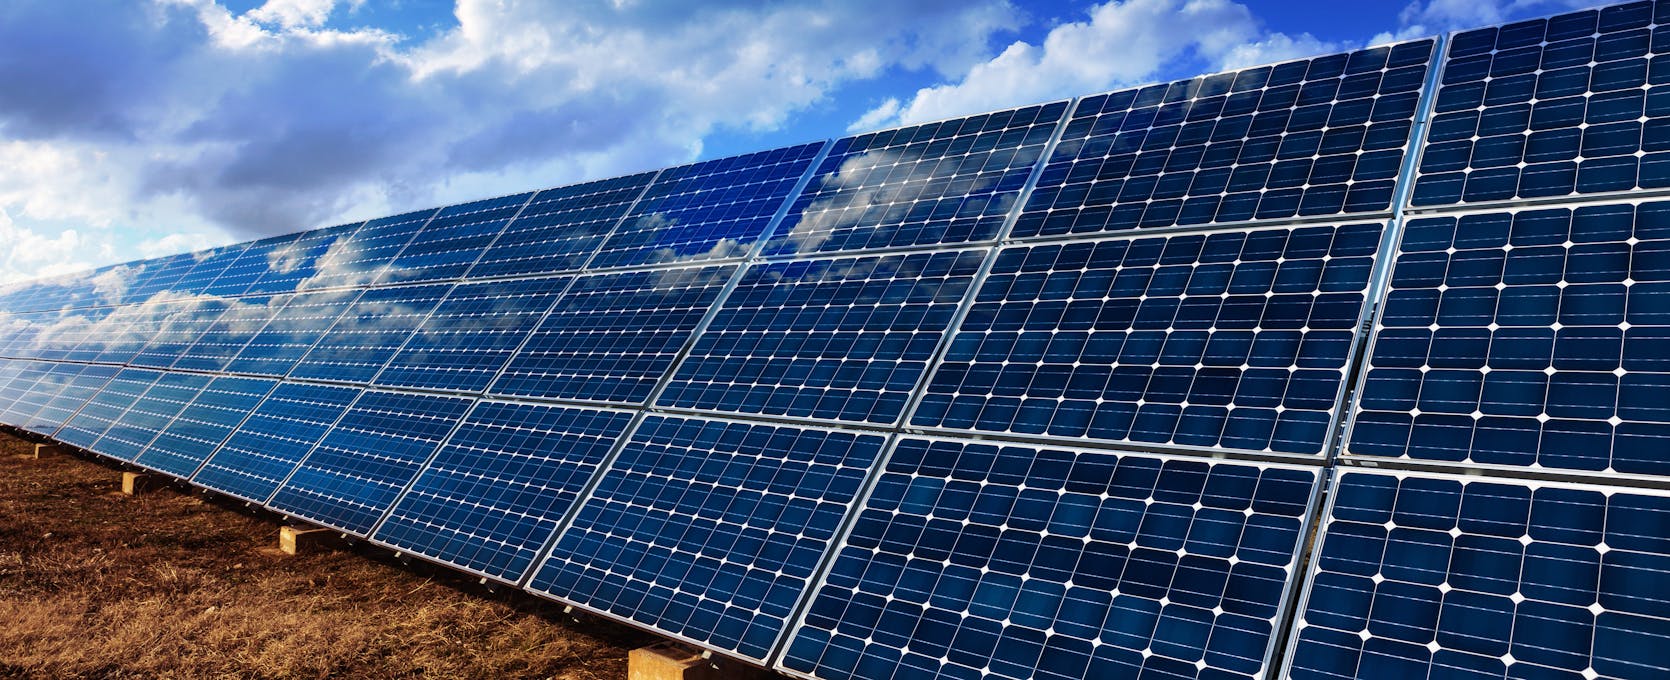 Solar panels for energy tax credits